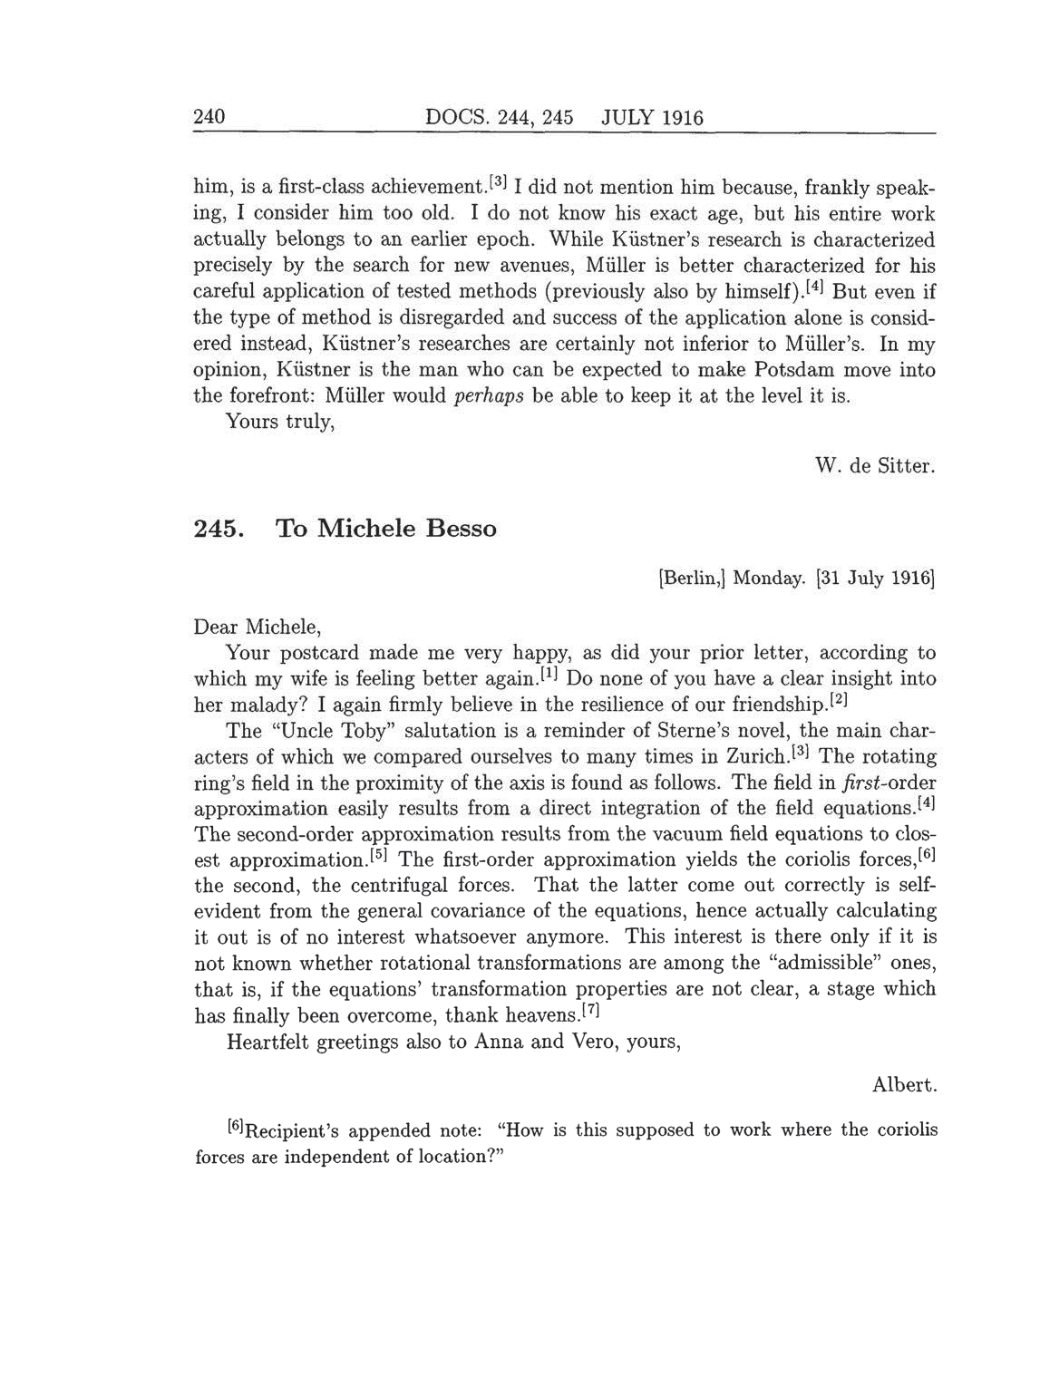 Volume 8: The Berlin Years: Correspondence, 1914-1918 (English translation supplement) page 240